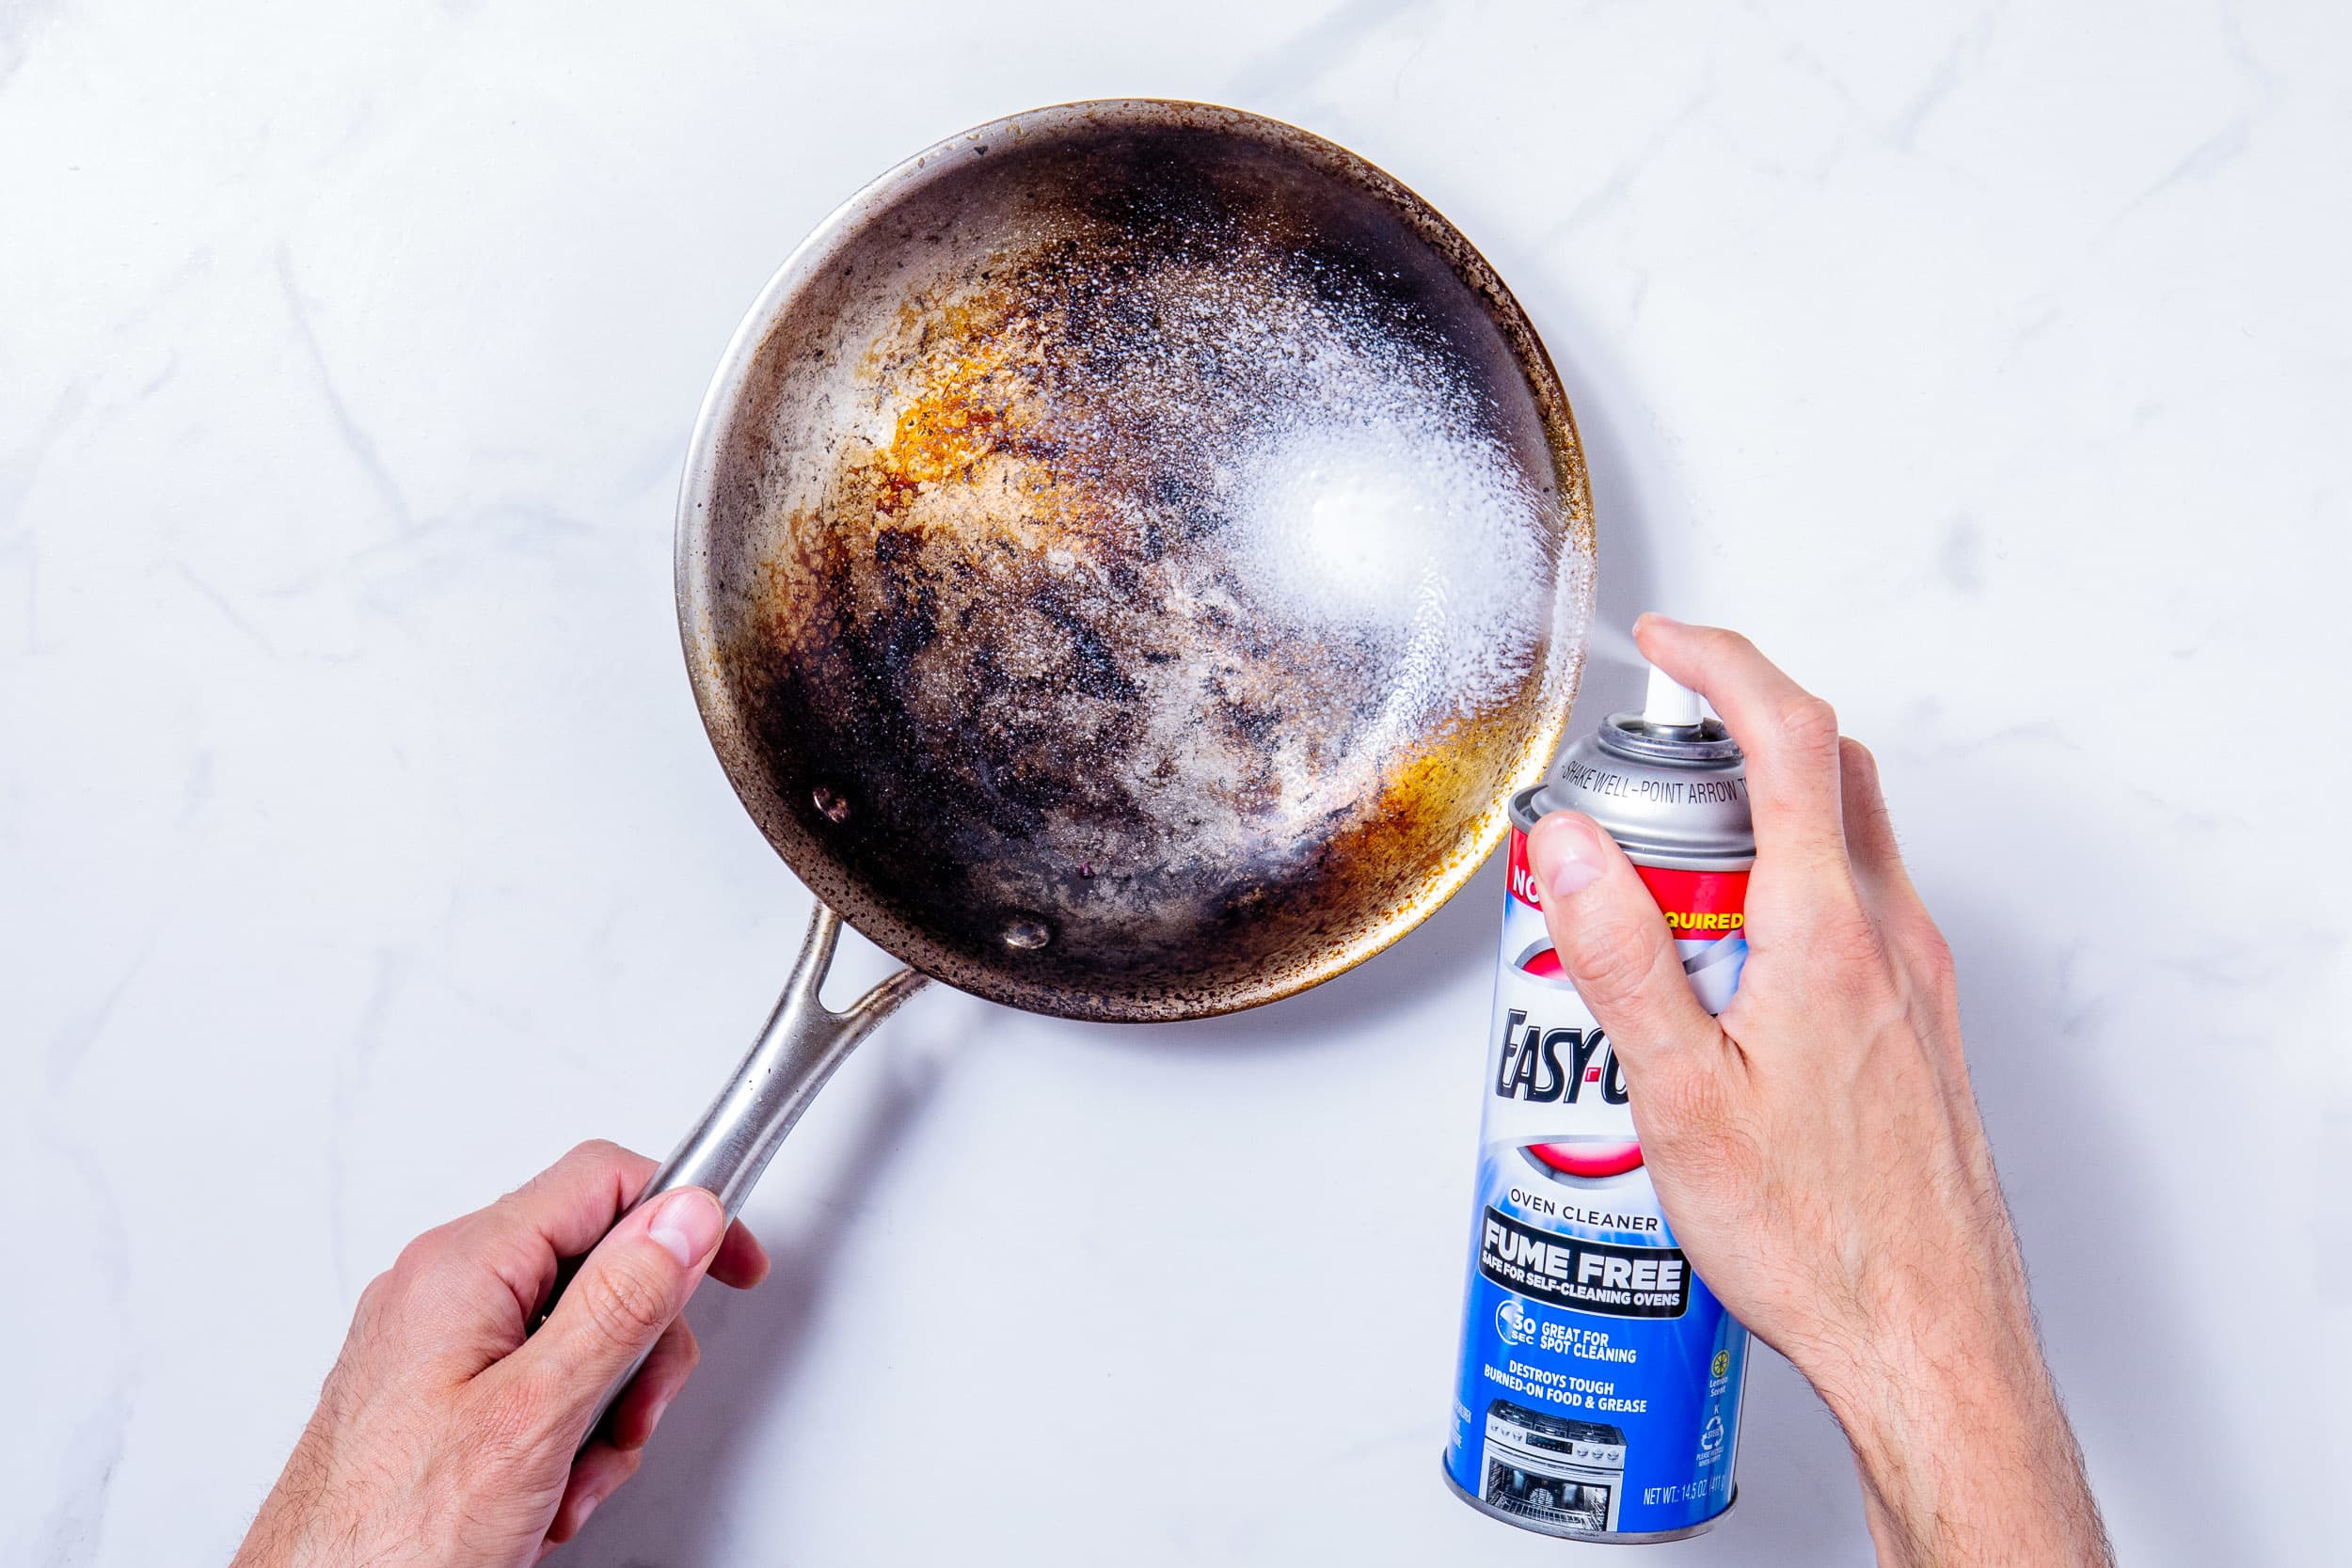 We Tried 10 Methods for Cleaning Discolored Stainless Steel Pans